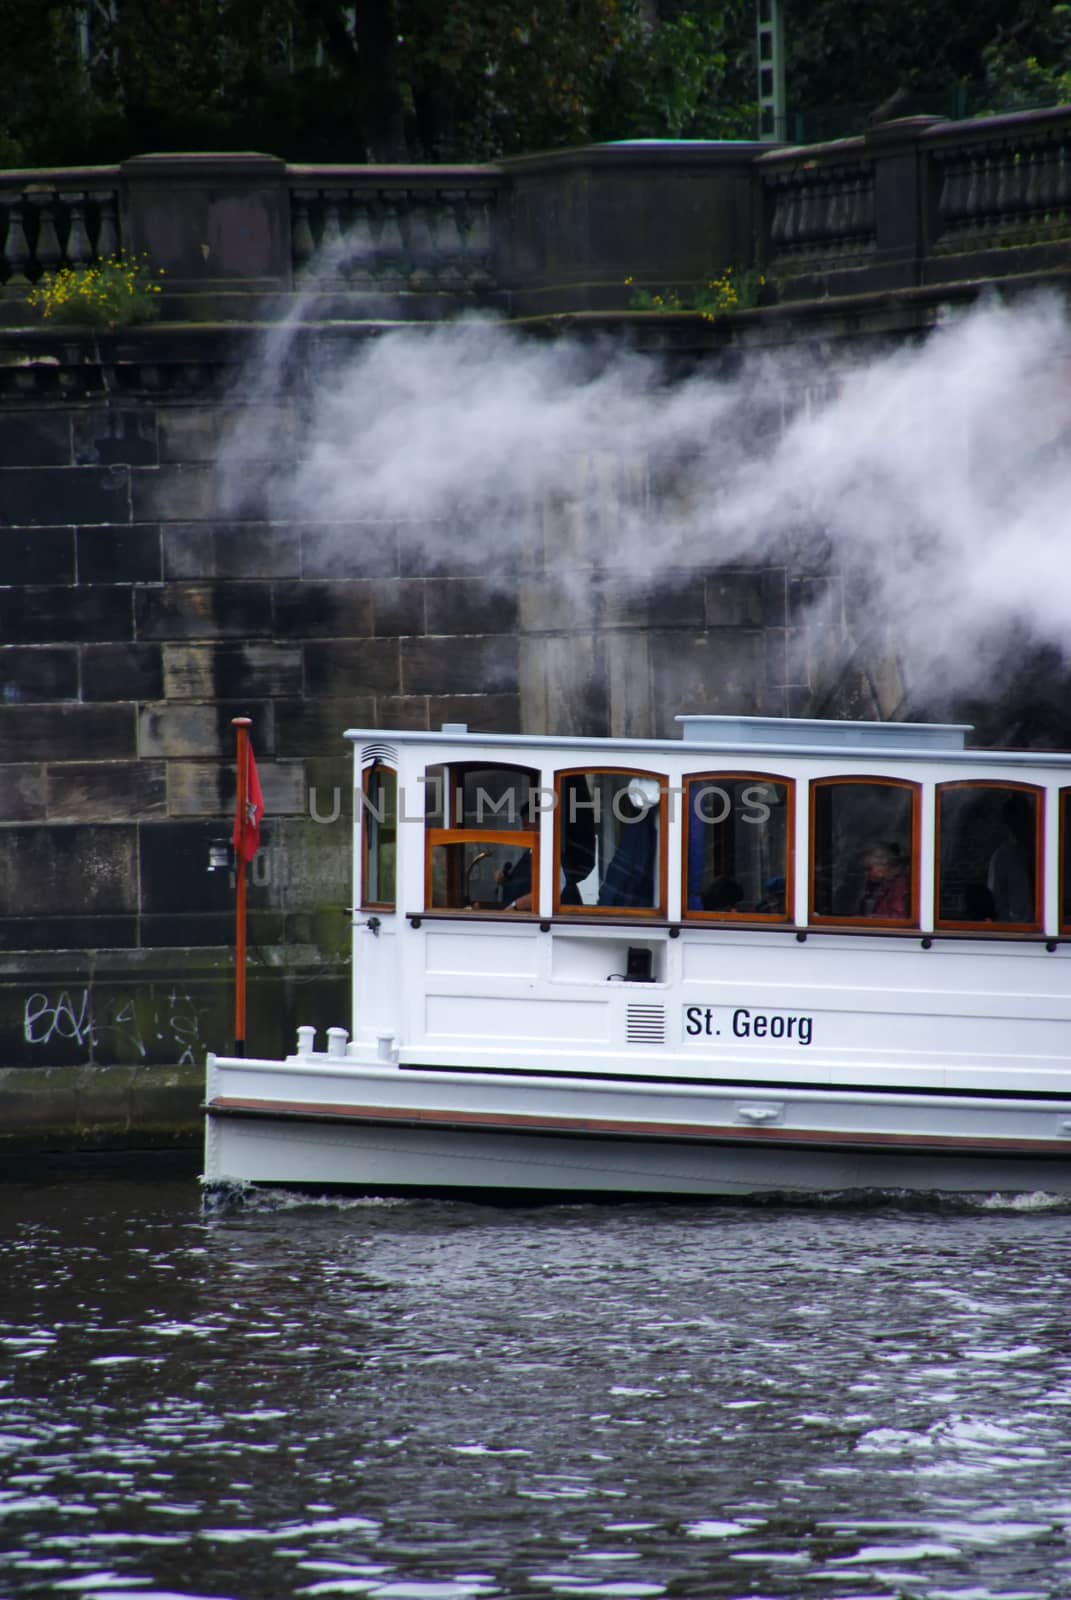 A barge on the river Alster in Hamburg.